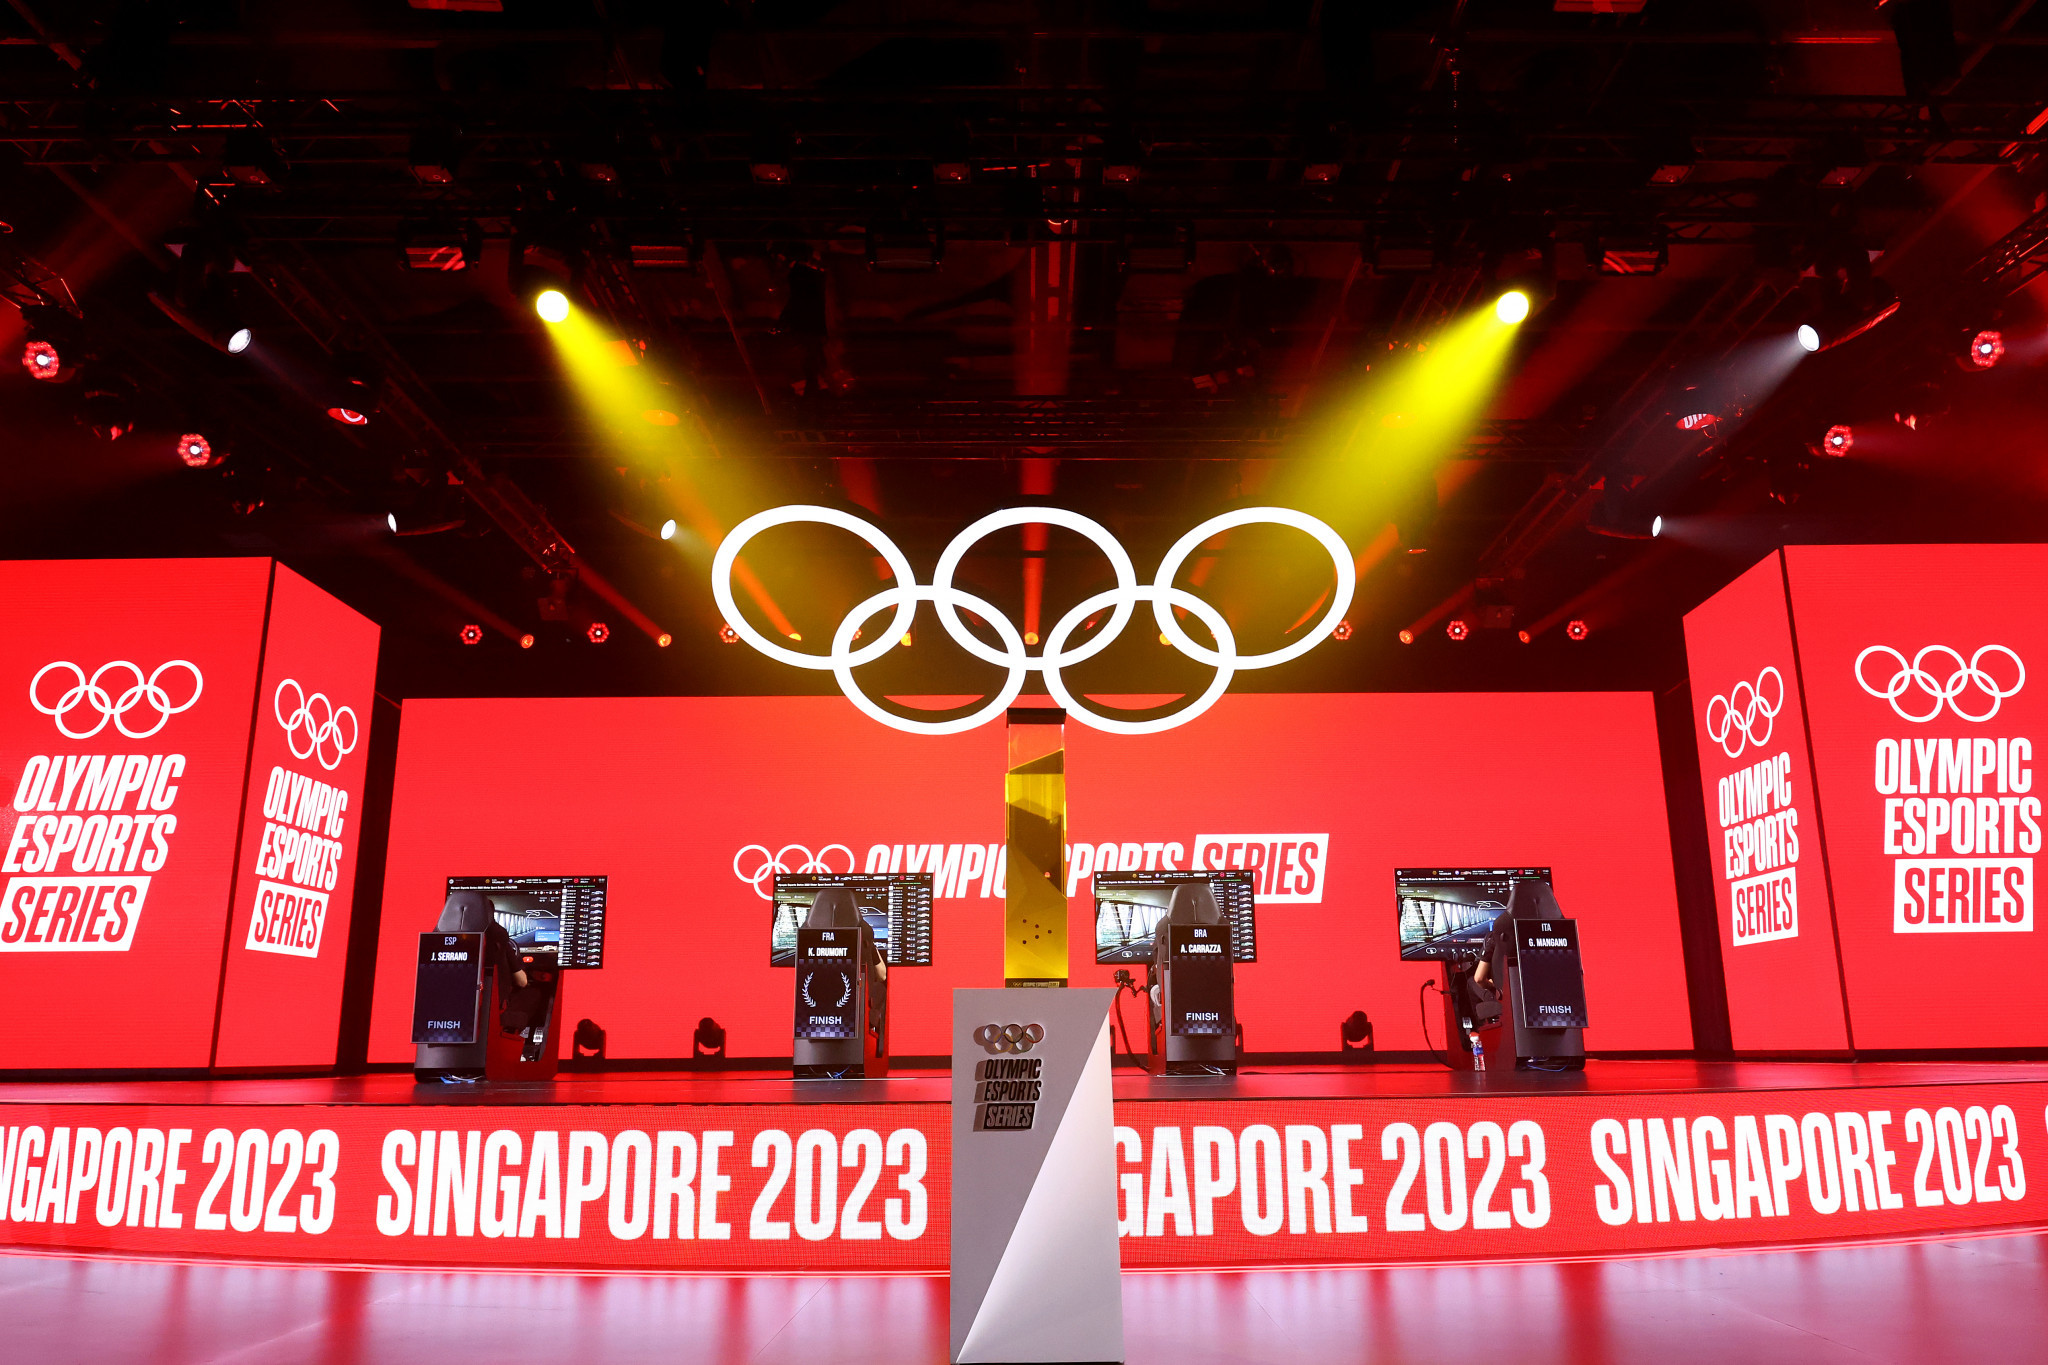 Bach announces IOC plan to launch inaugural Olympic Esports Games